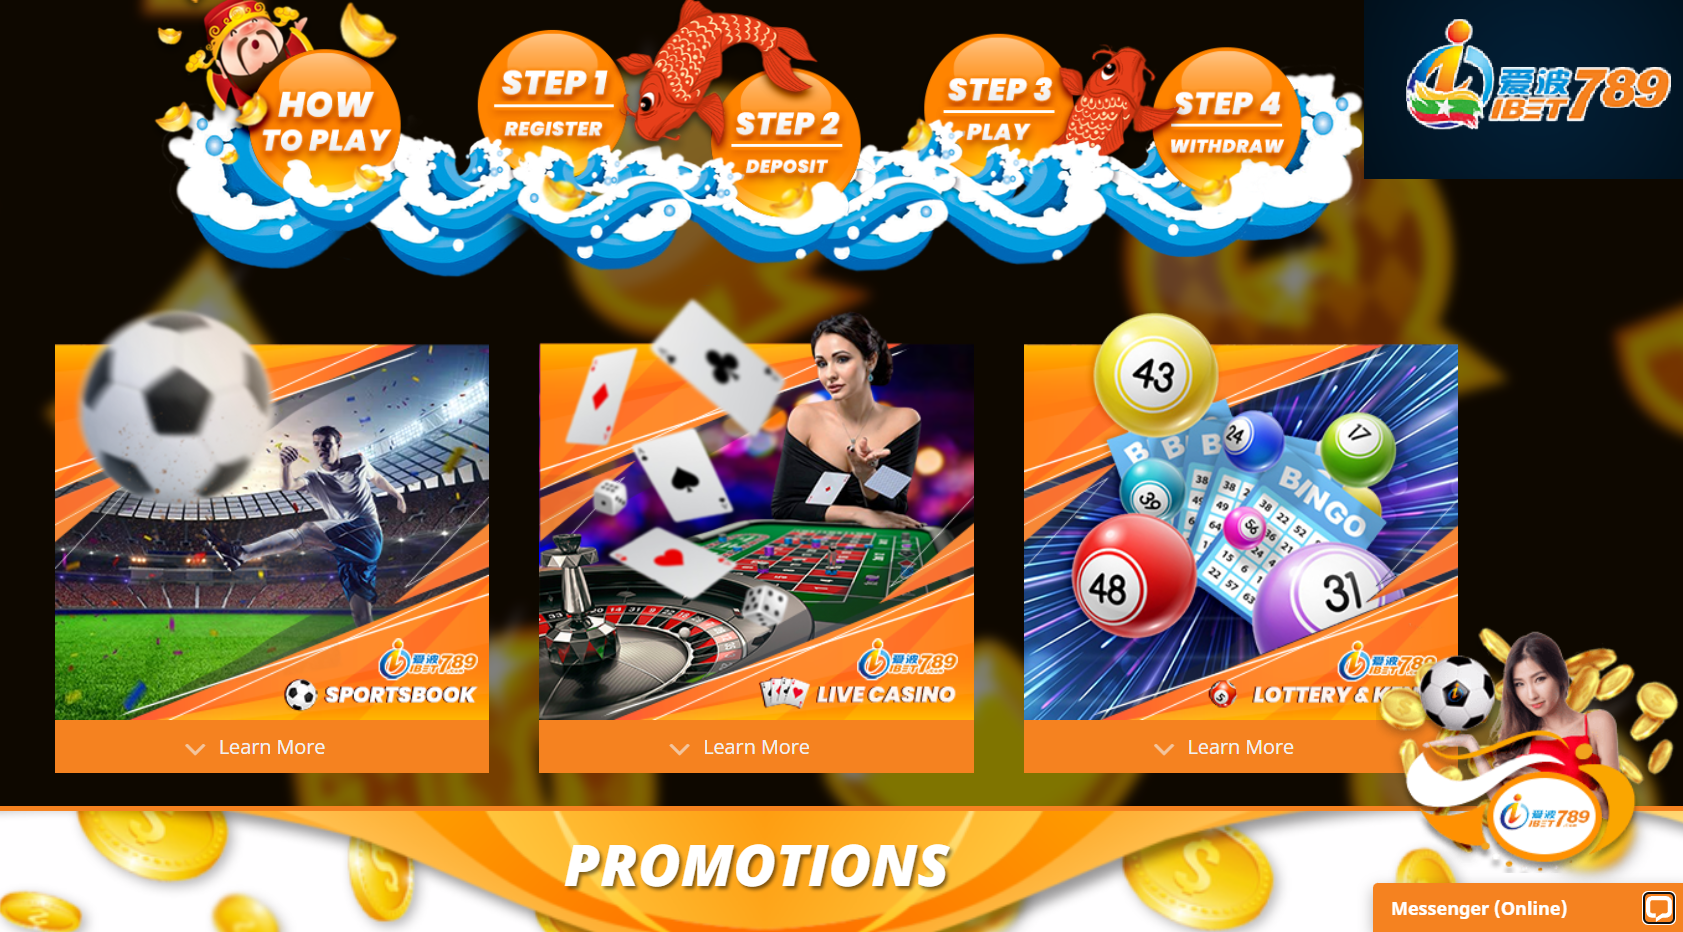 IBet789 casino games and software